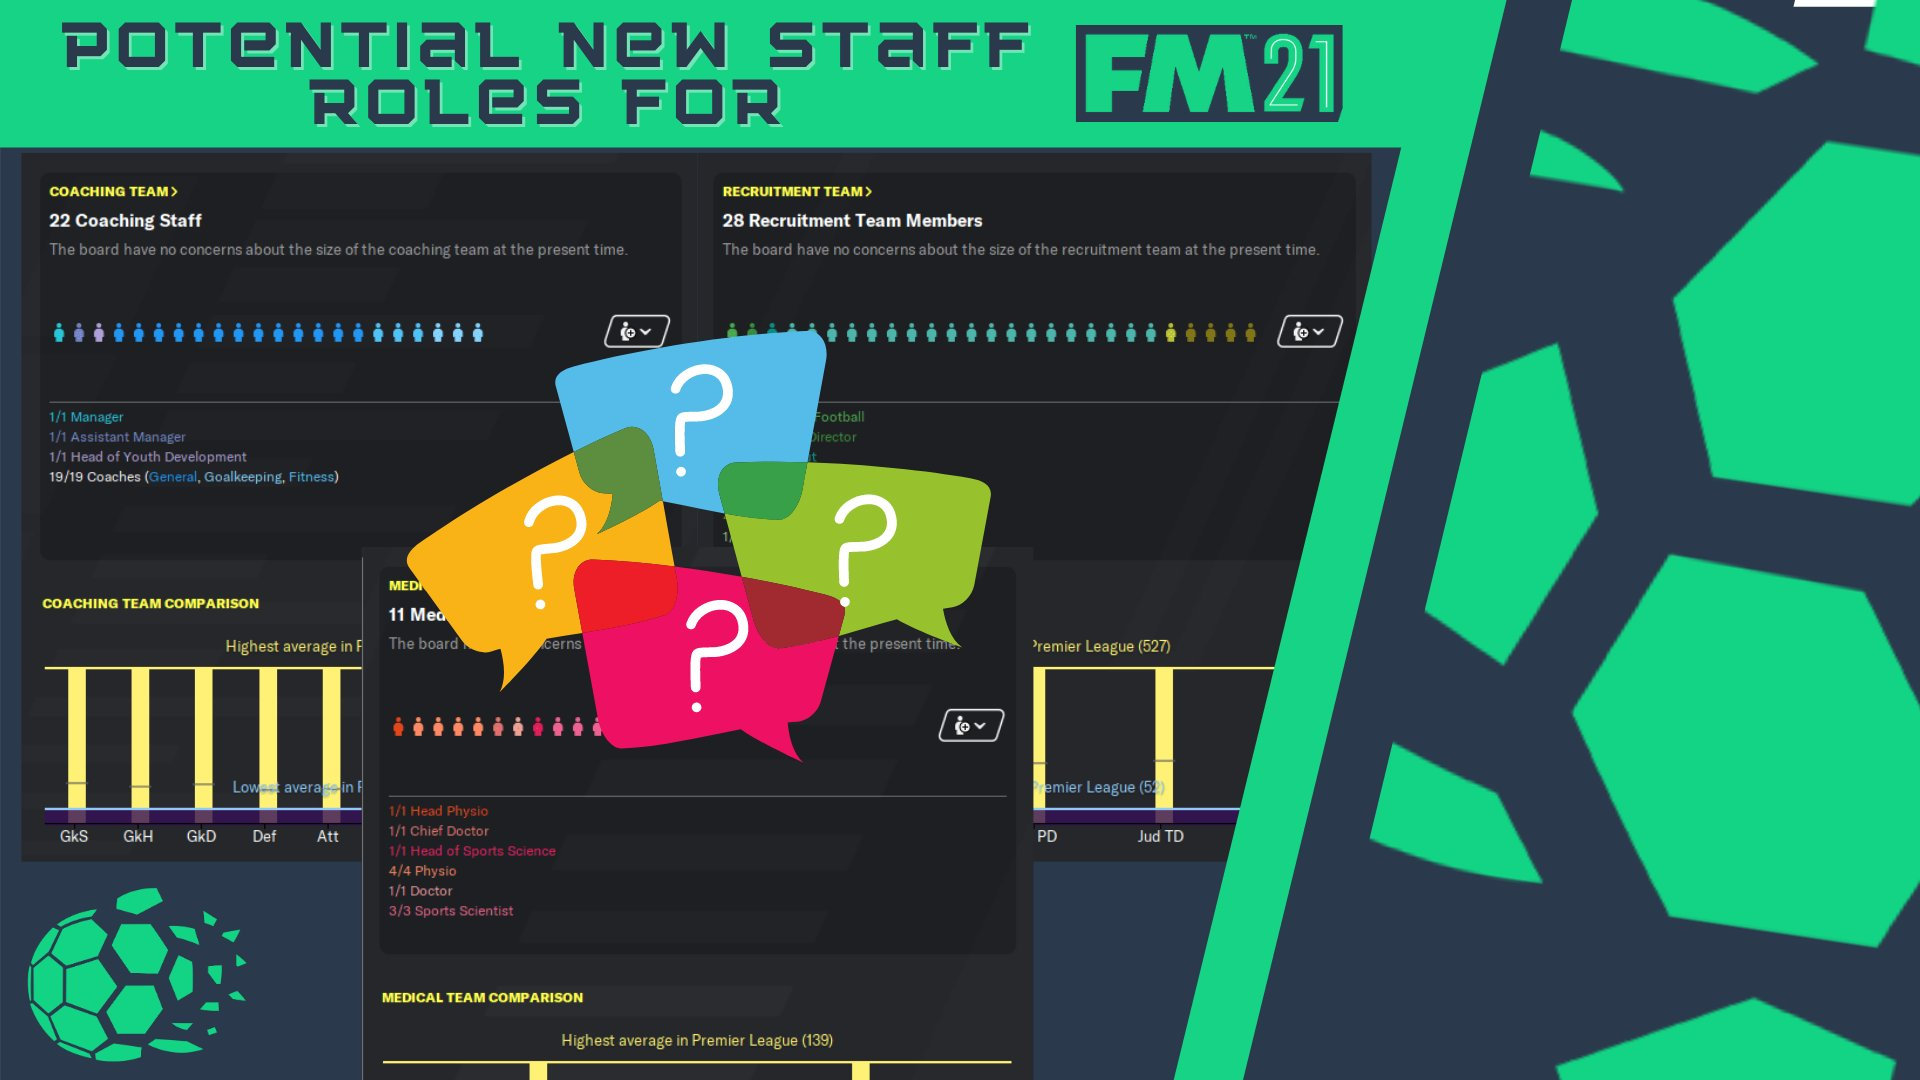 Potential New Staff Roles for FM21